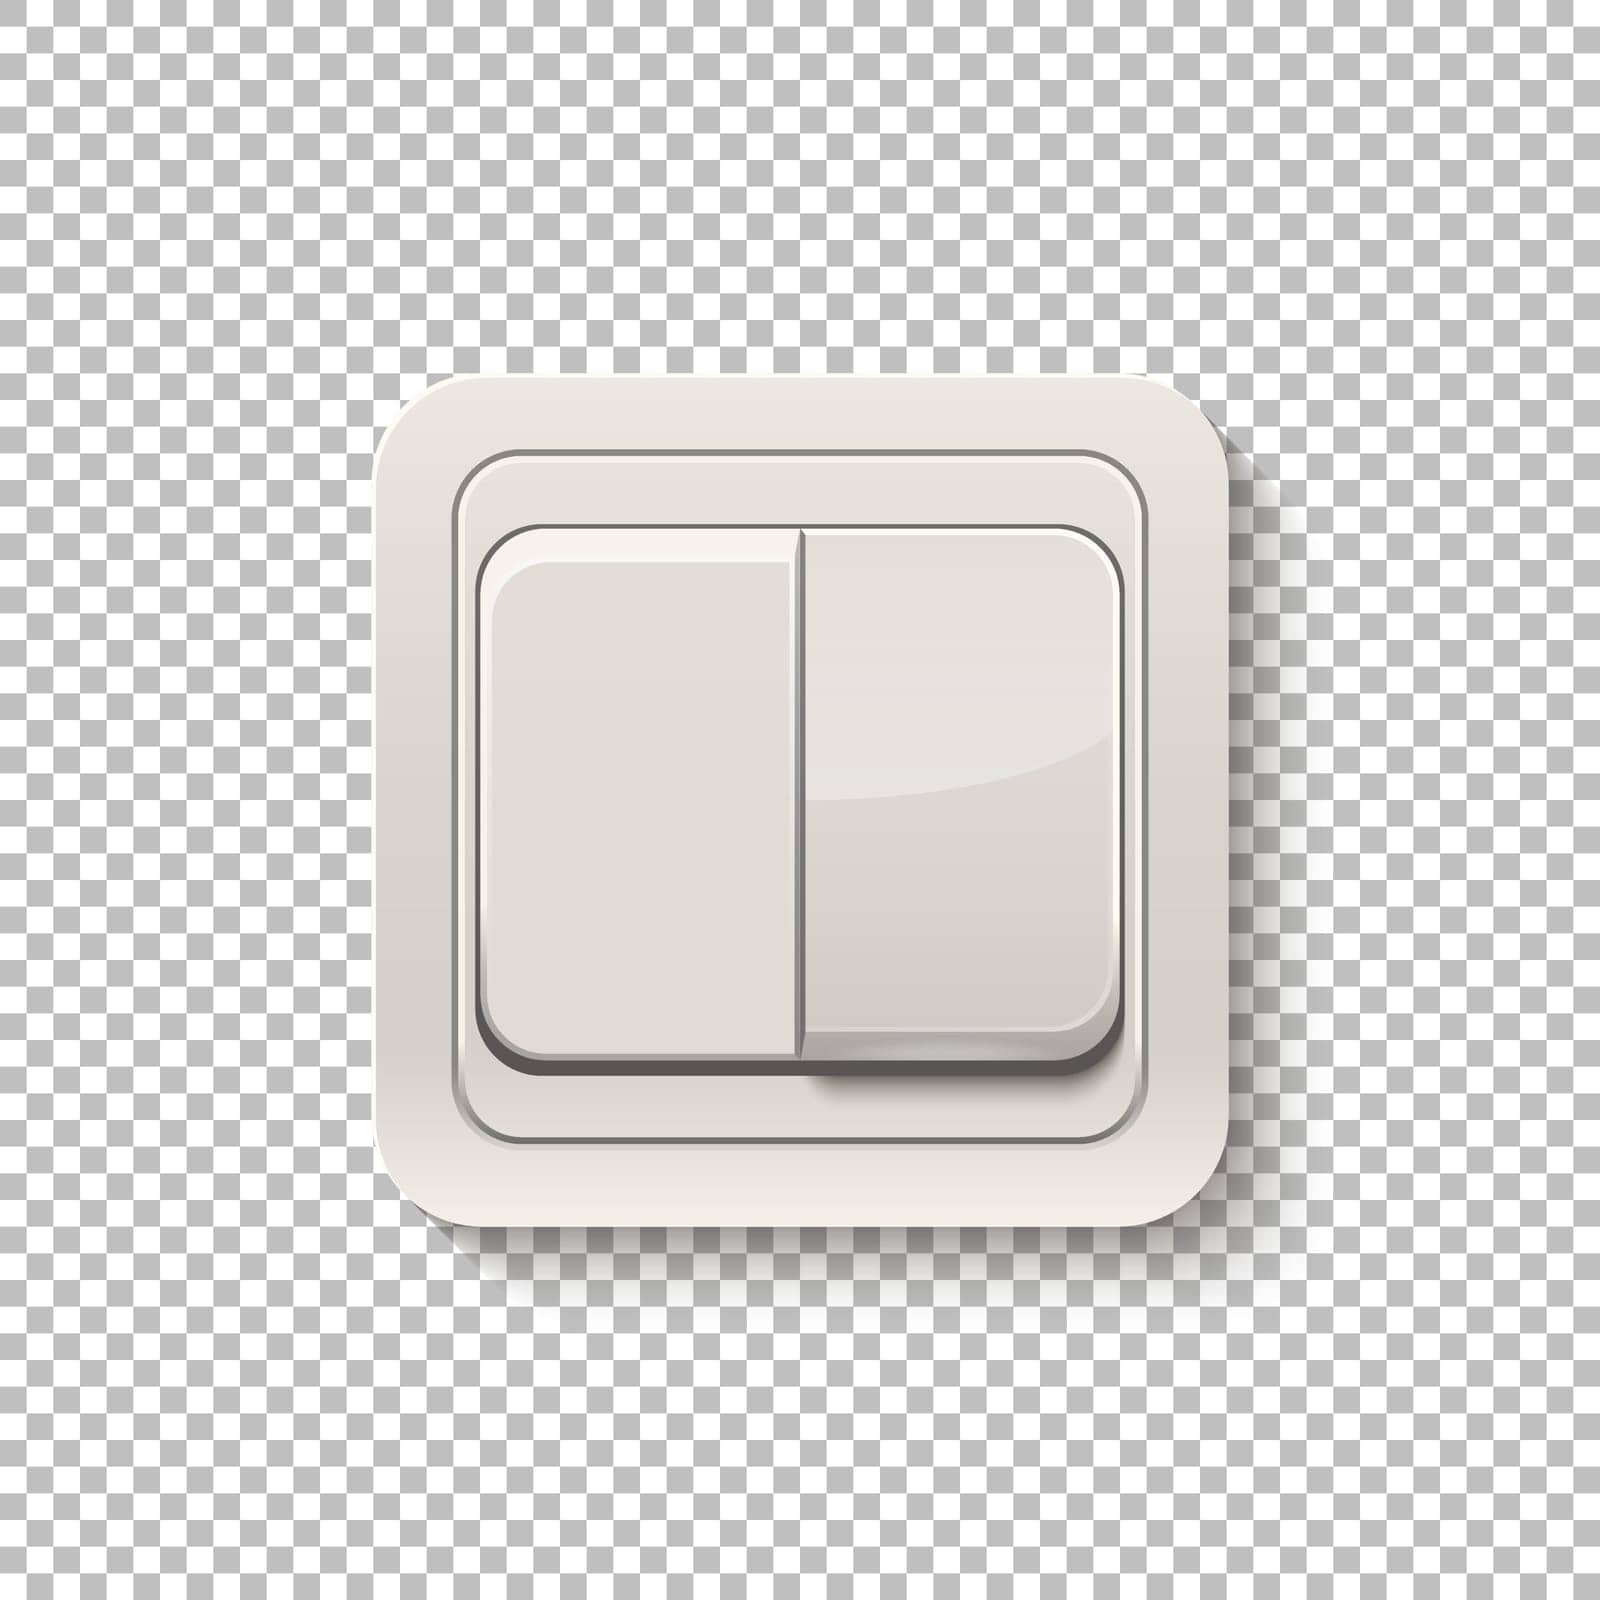 Realistic switch isolated on a transparent background. Vector EPS10 illustration.